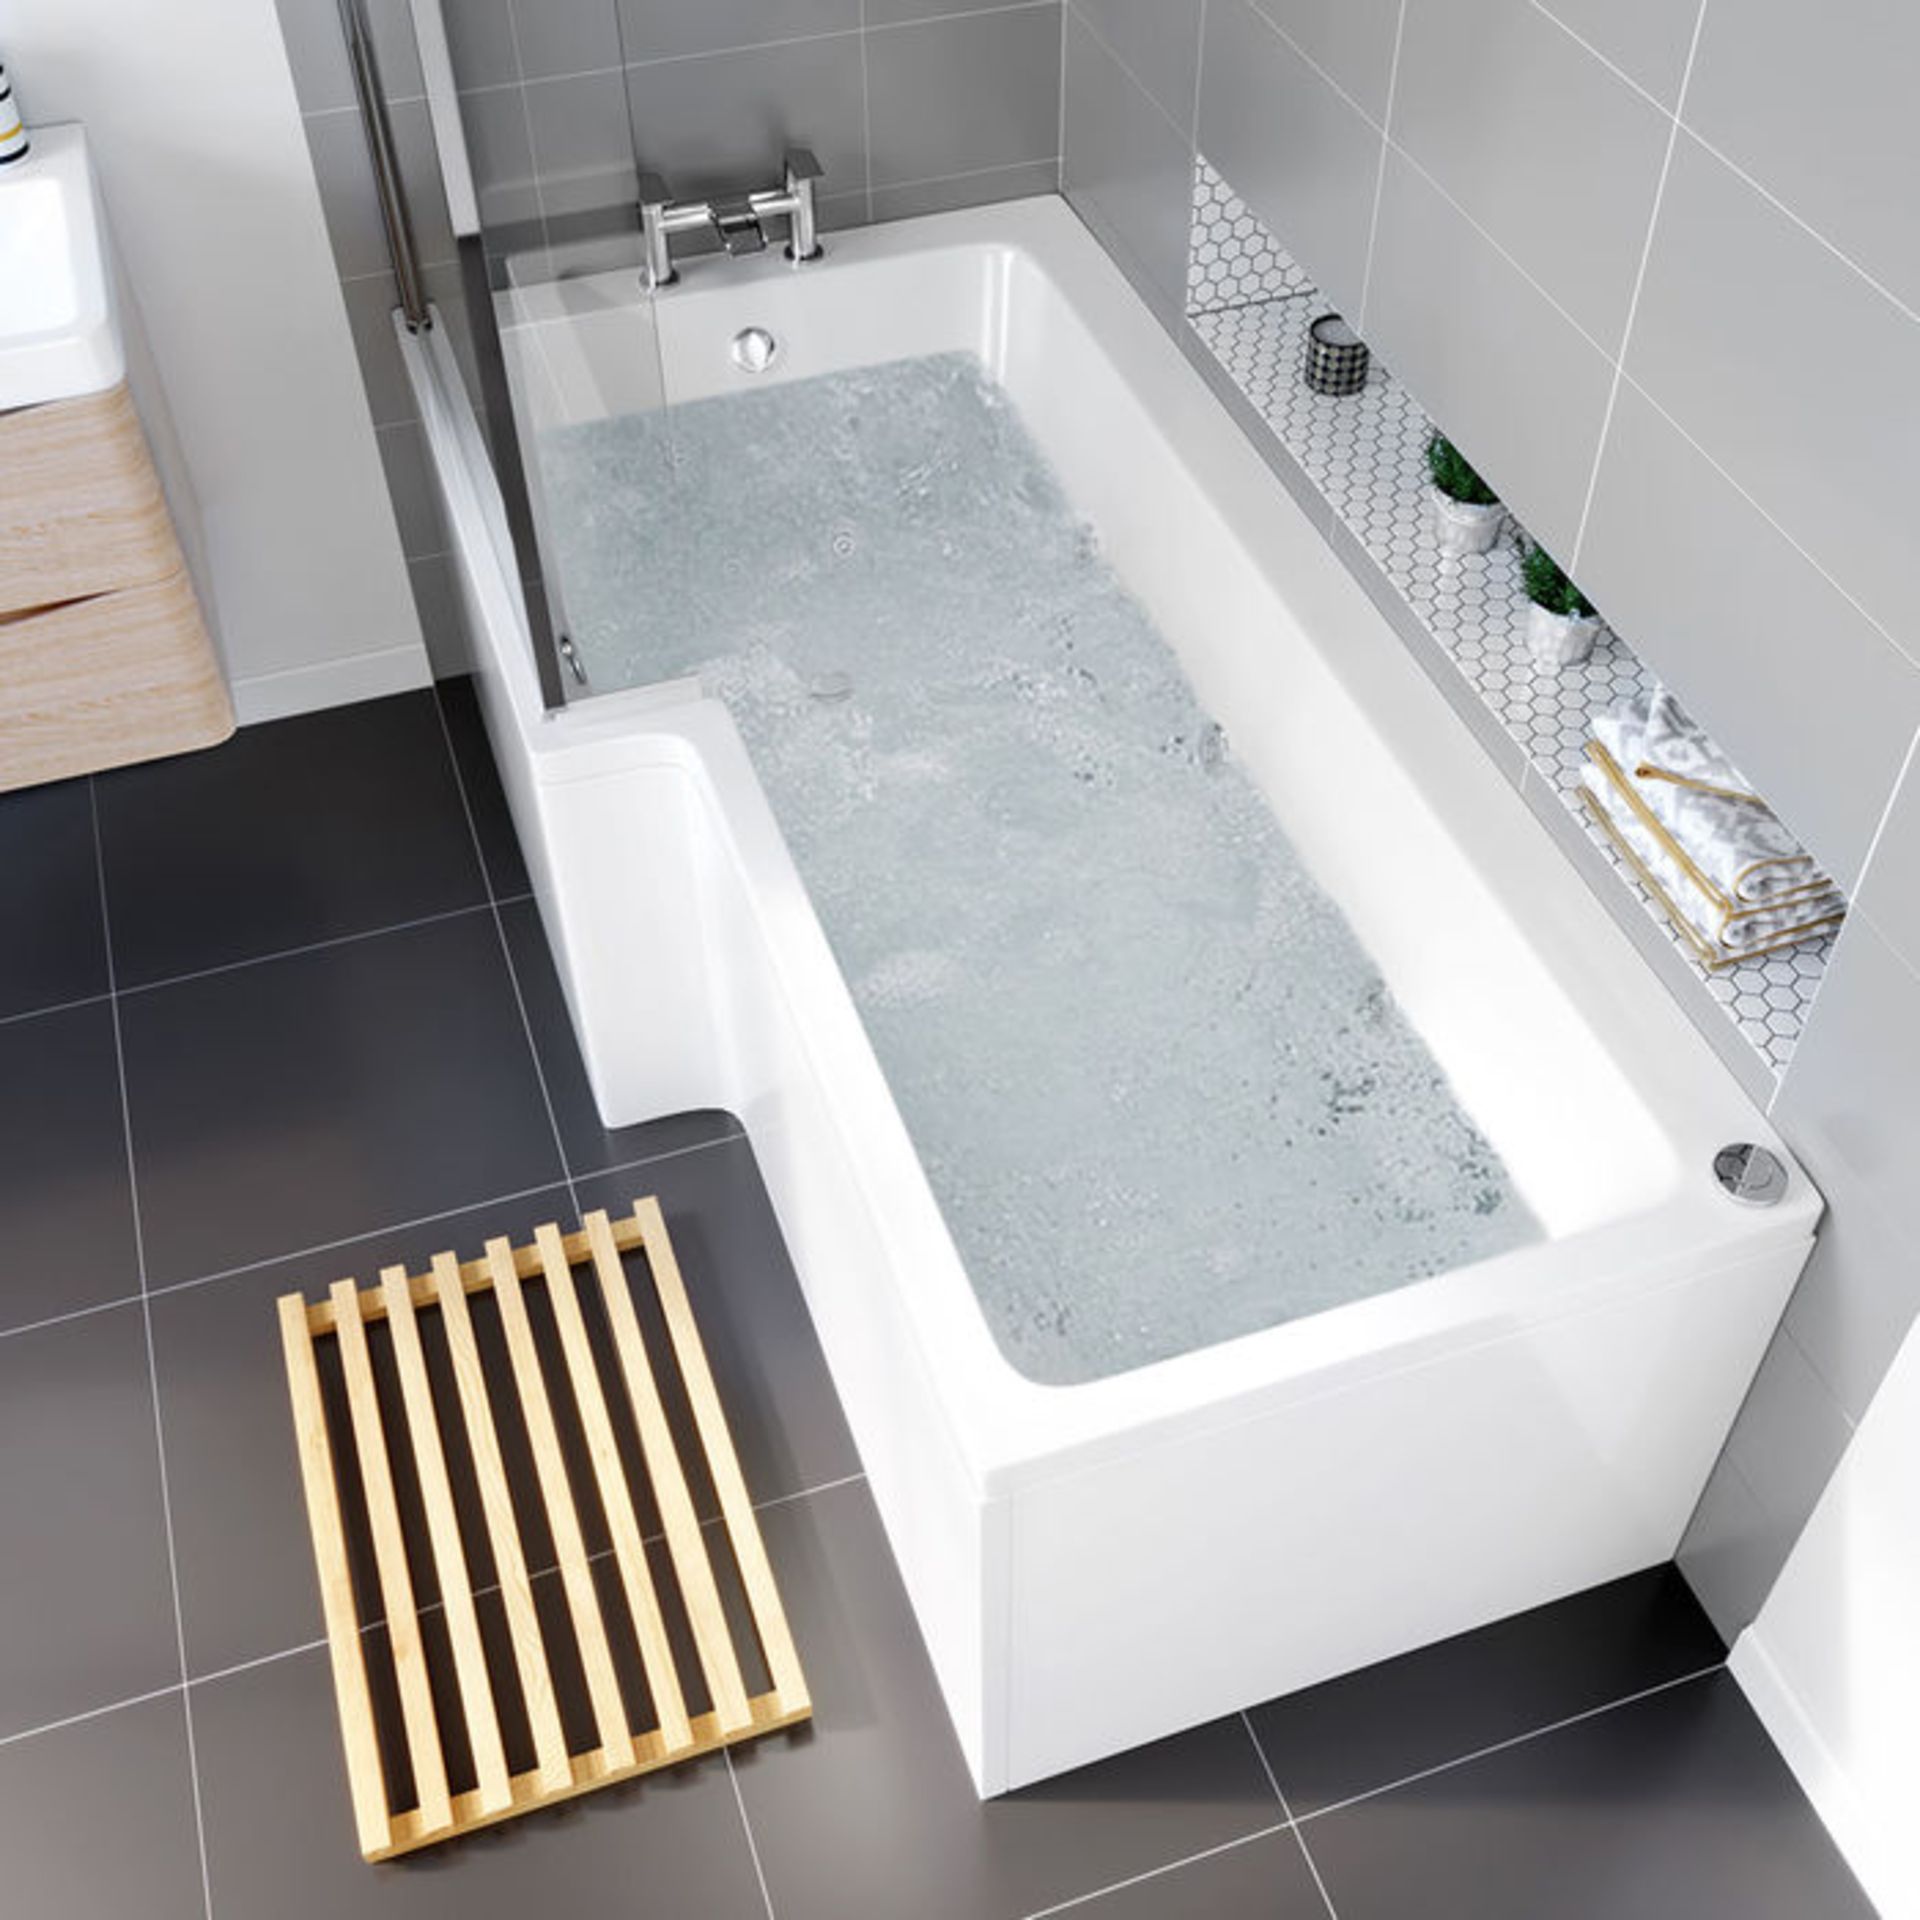 (TA3) 1700x700x510mm Whirlpool Left Hand L Shaped Bath - 14 Jets. Indulge in luxury for a truly